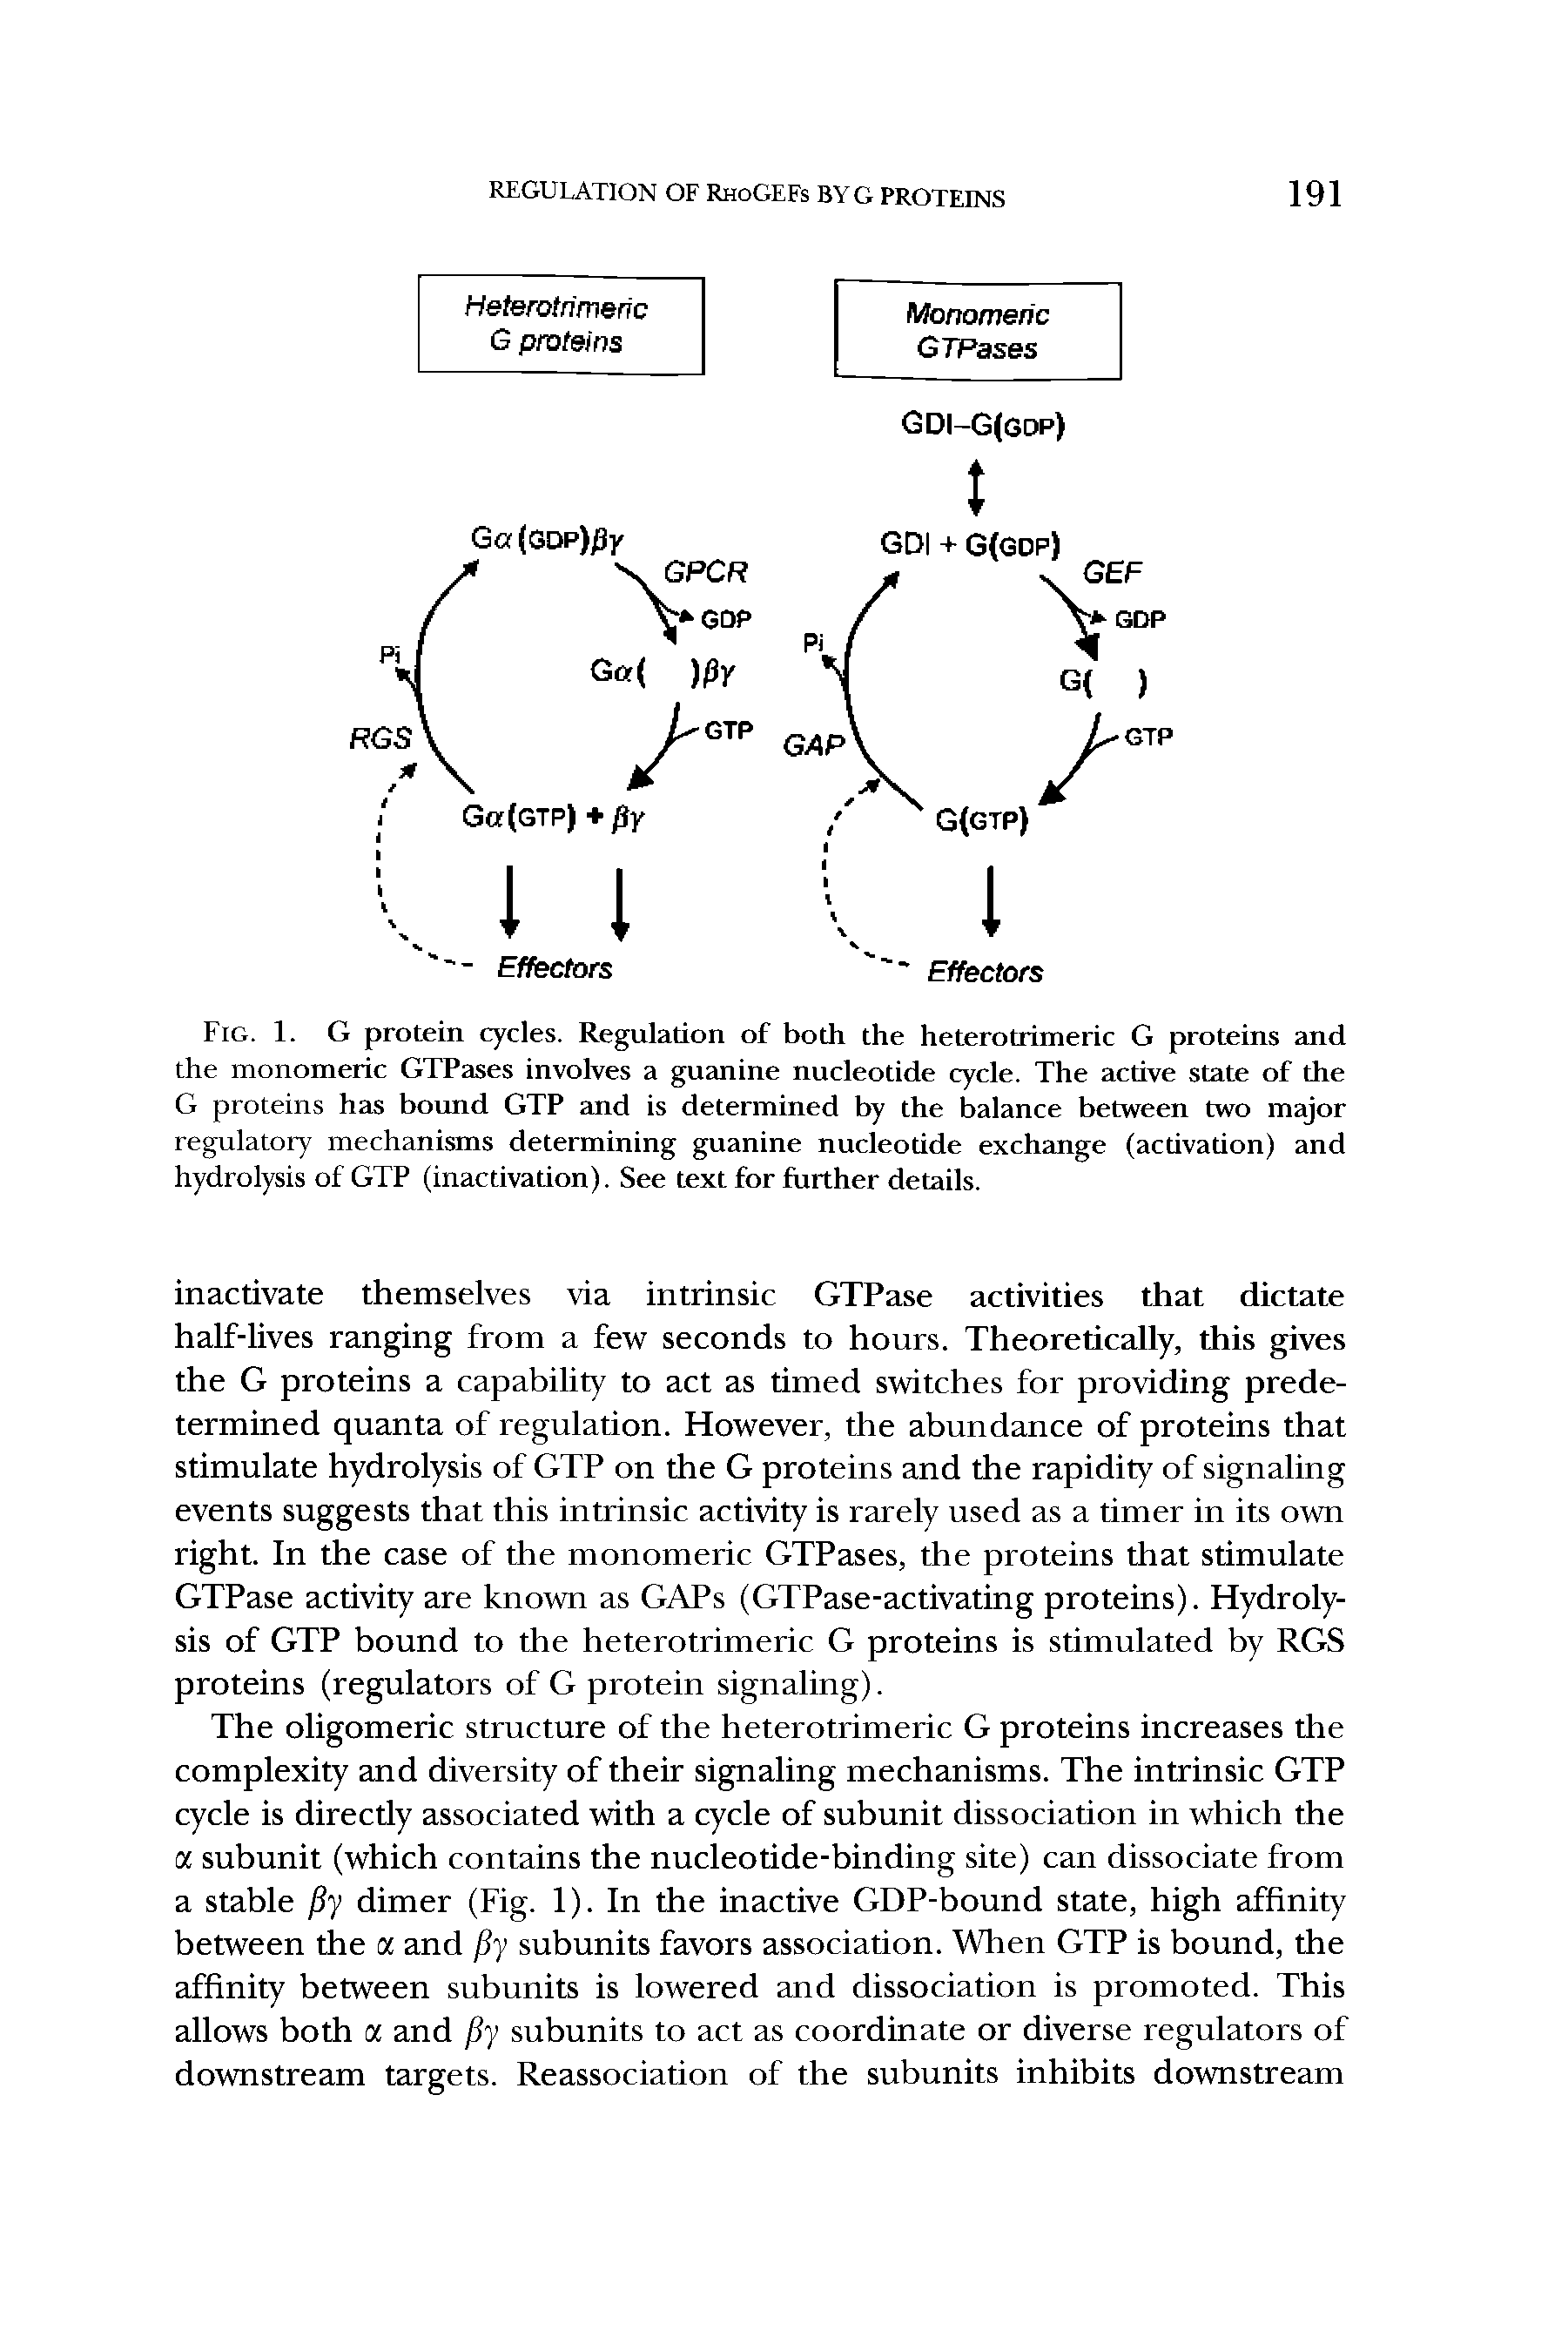 Fig. 1. G protein cycles. Regulation of both the heterotrimeric G proteins and the monomeric GTPases involves a guanine nucleotide cycle. The active state of the G proteins has bound GTP and is determined by the balance between two major regulatory mechanisms determining guanine nucleotide exchange (activation) and hydrolysis of GTP (inactivation). See text for further details.